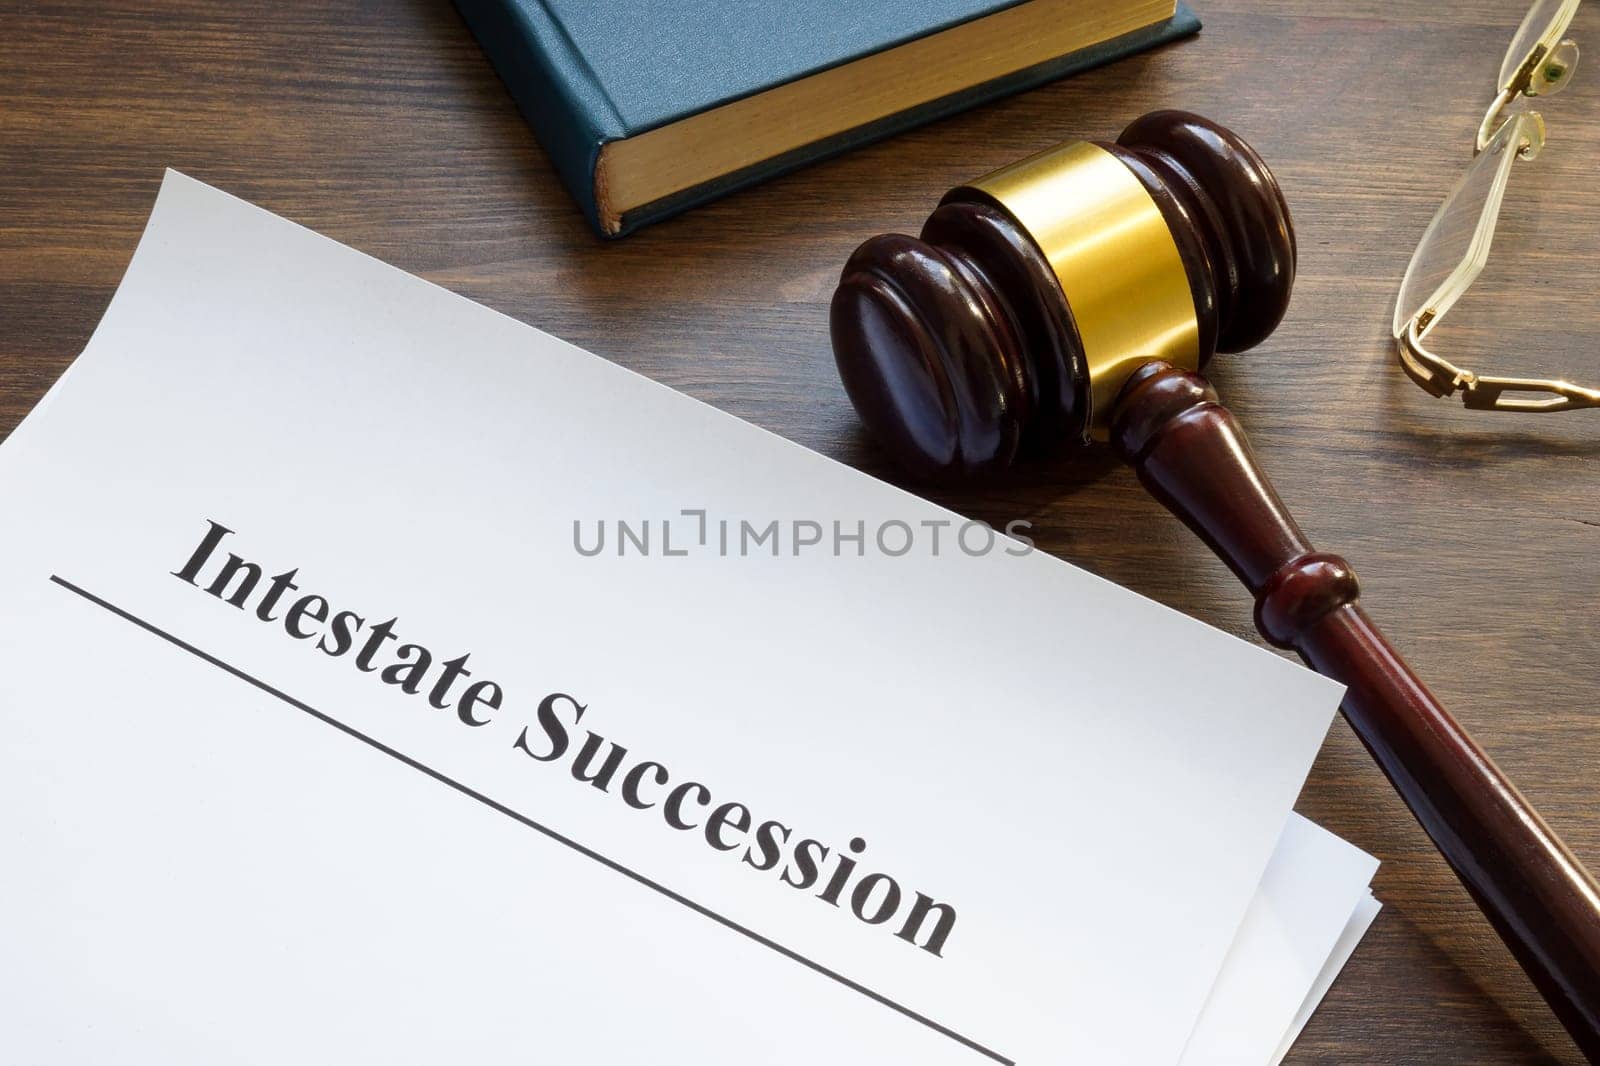 Intestate succession, gavel and book on the table. by designer491